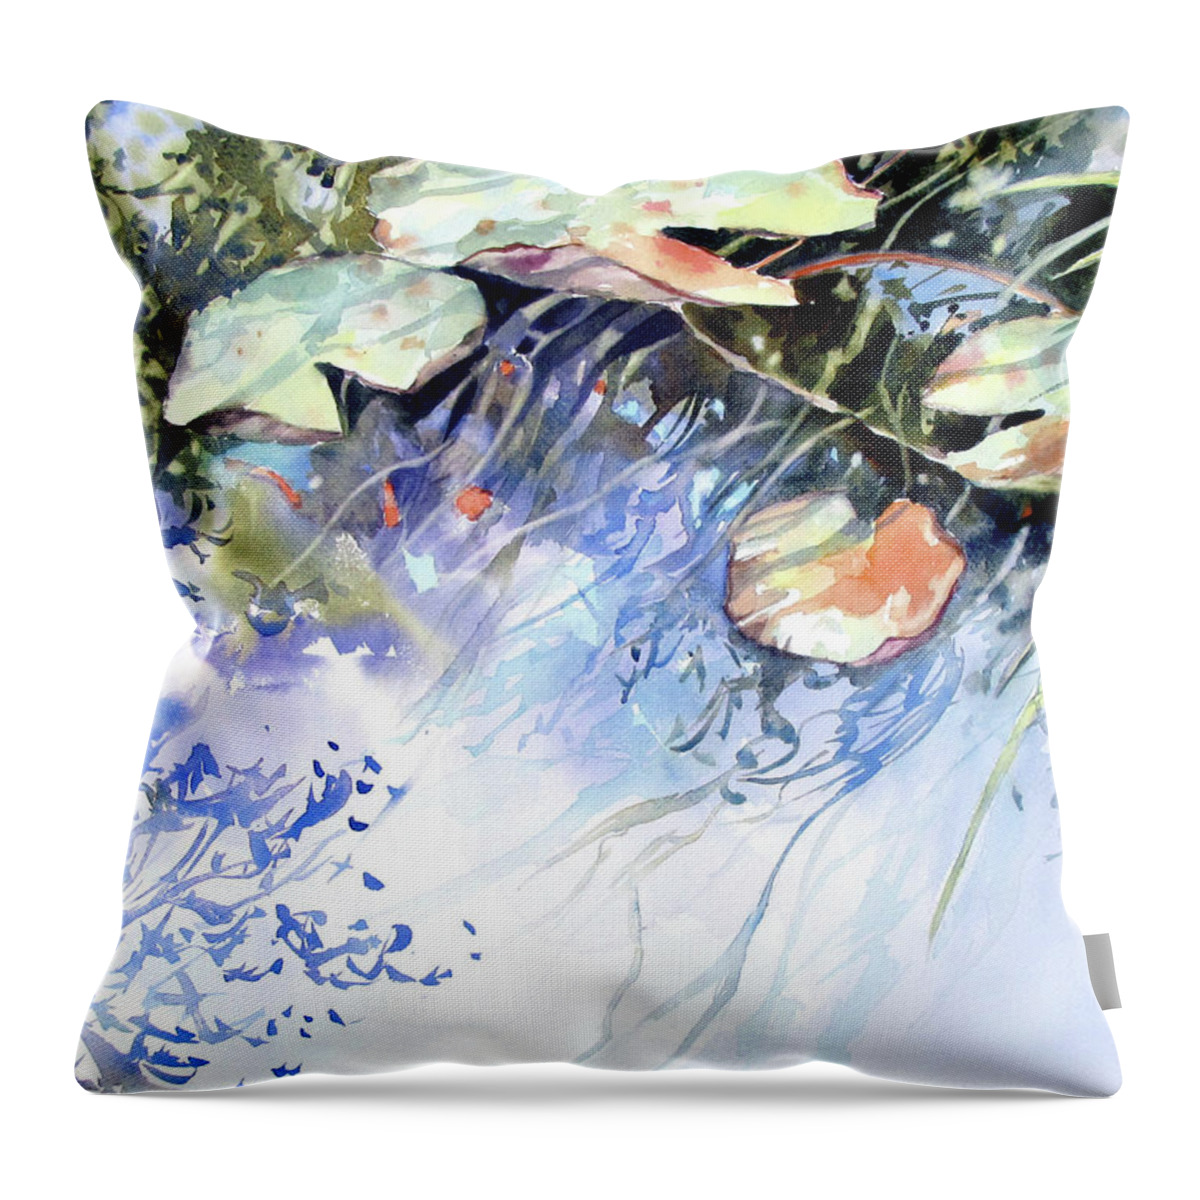 Watercolor Throw Pillow featuring the painting Shadows and Reflections by Rae Andrews